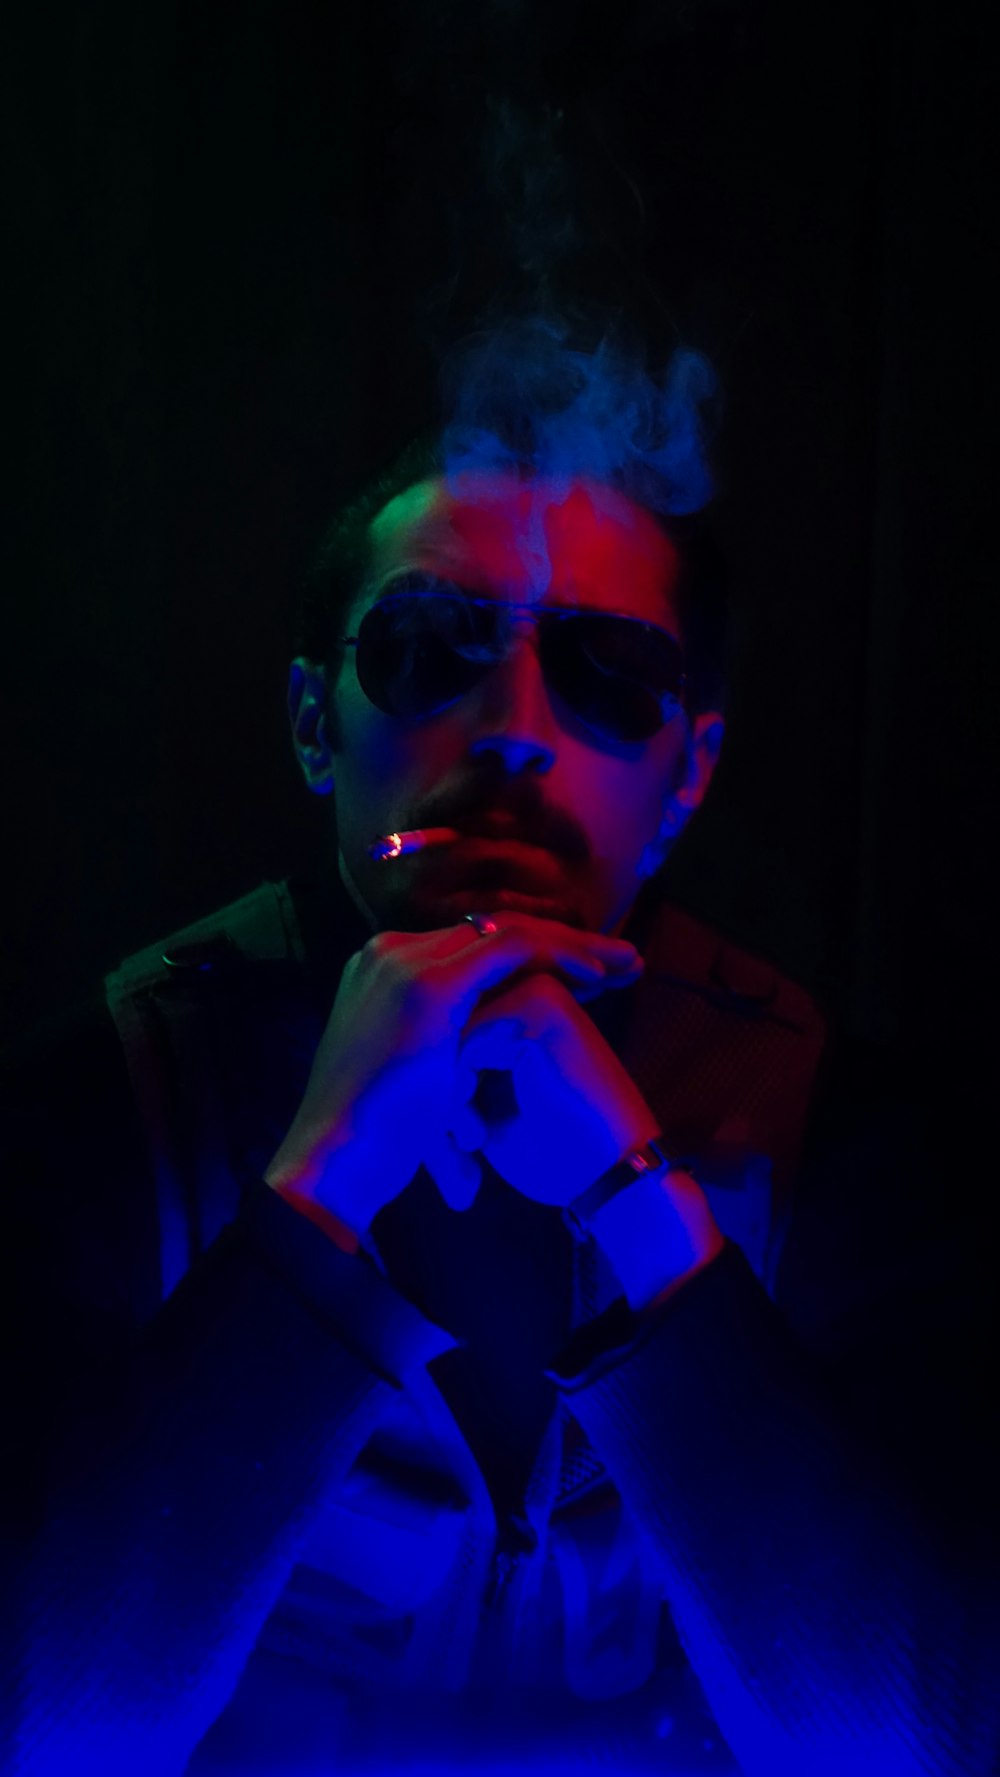 a man wearing sunglasses and smoking a cigarette